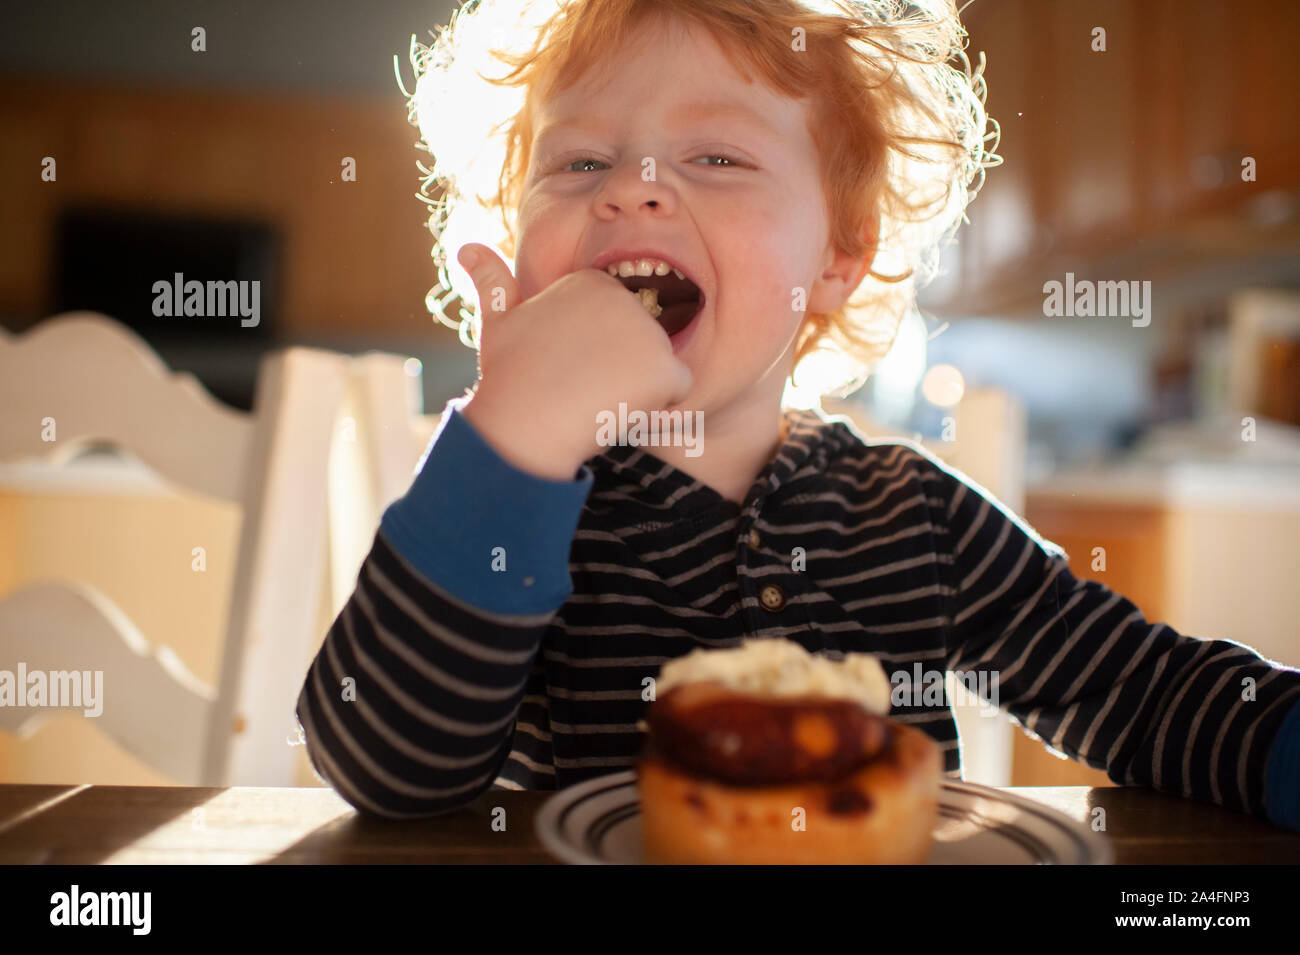 Toddler boy sitting at table licking frosting from finger at breakfast Stock Photo